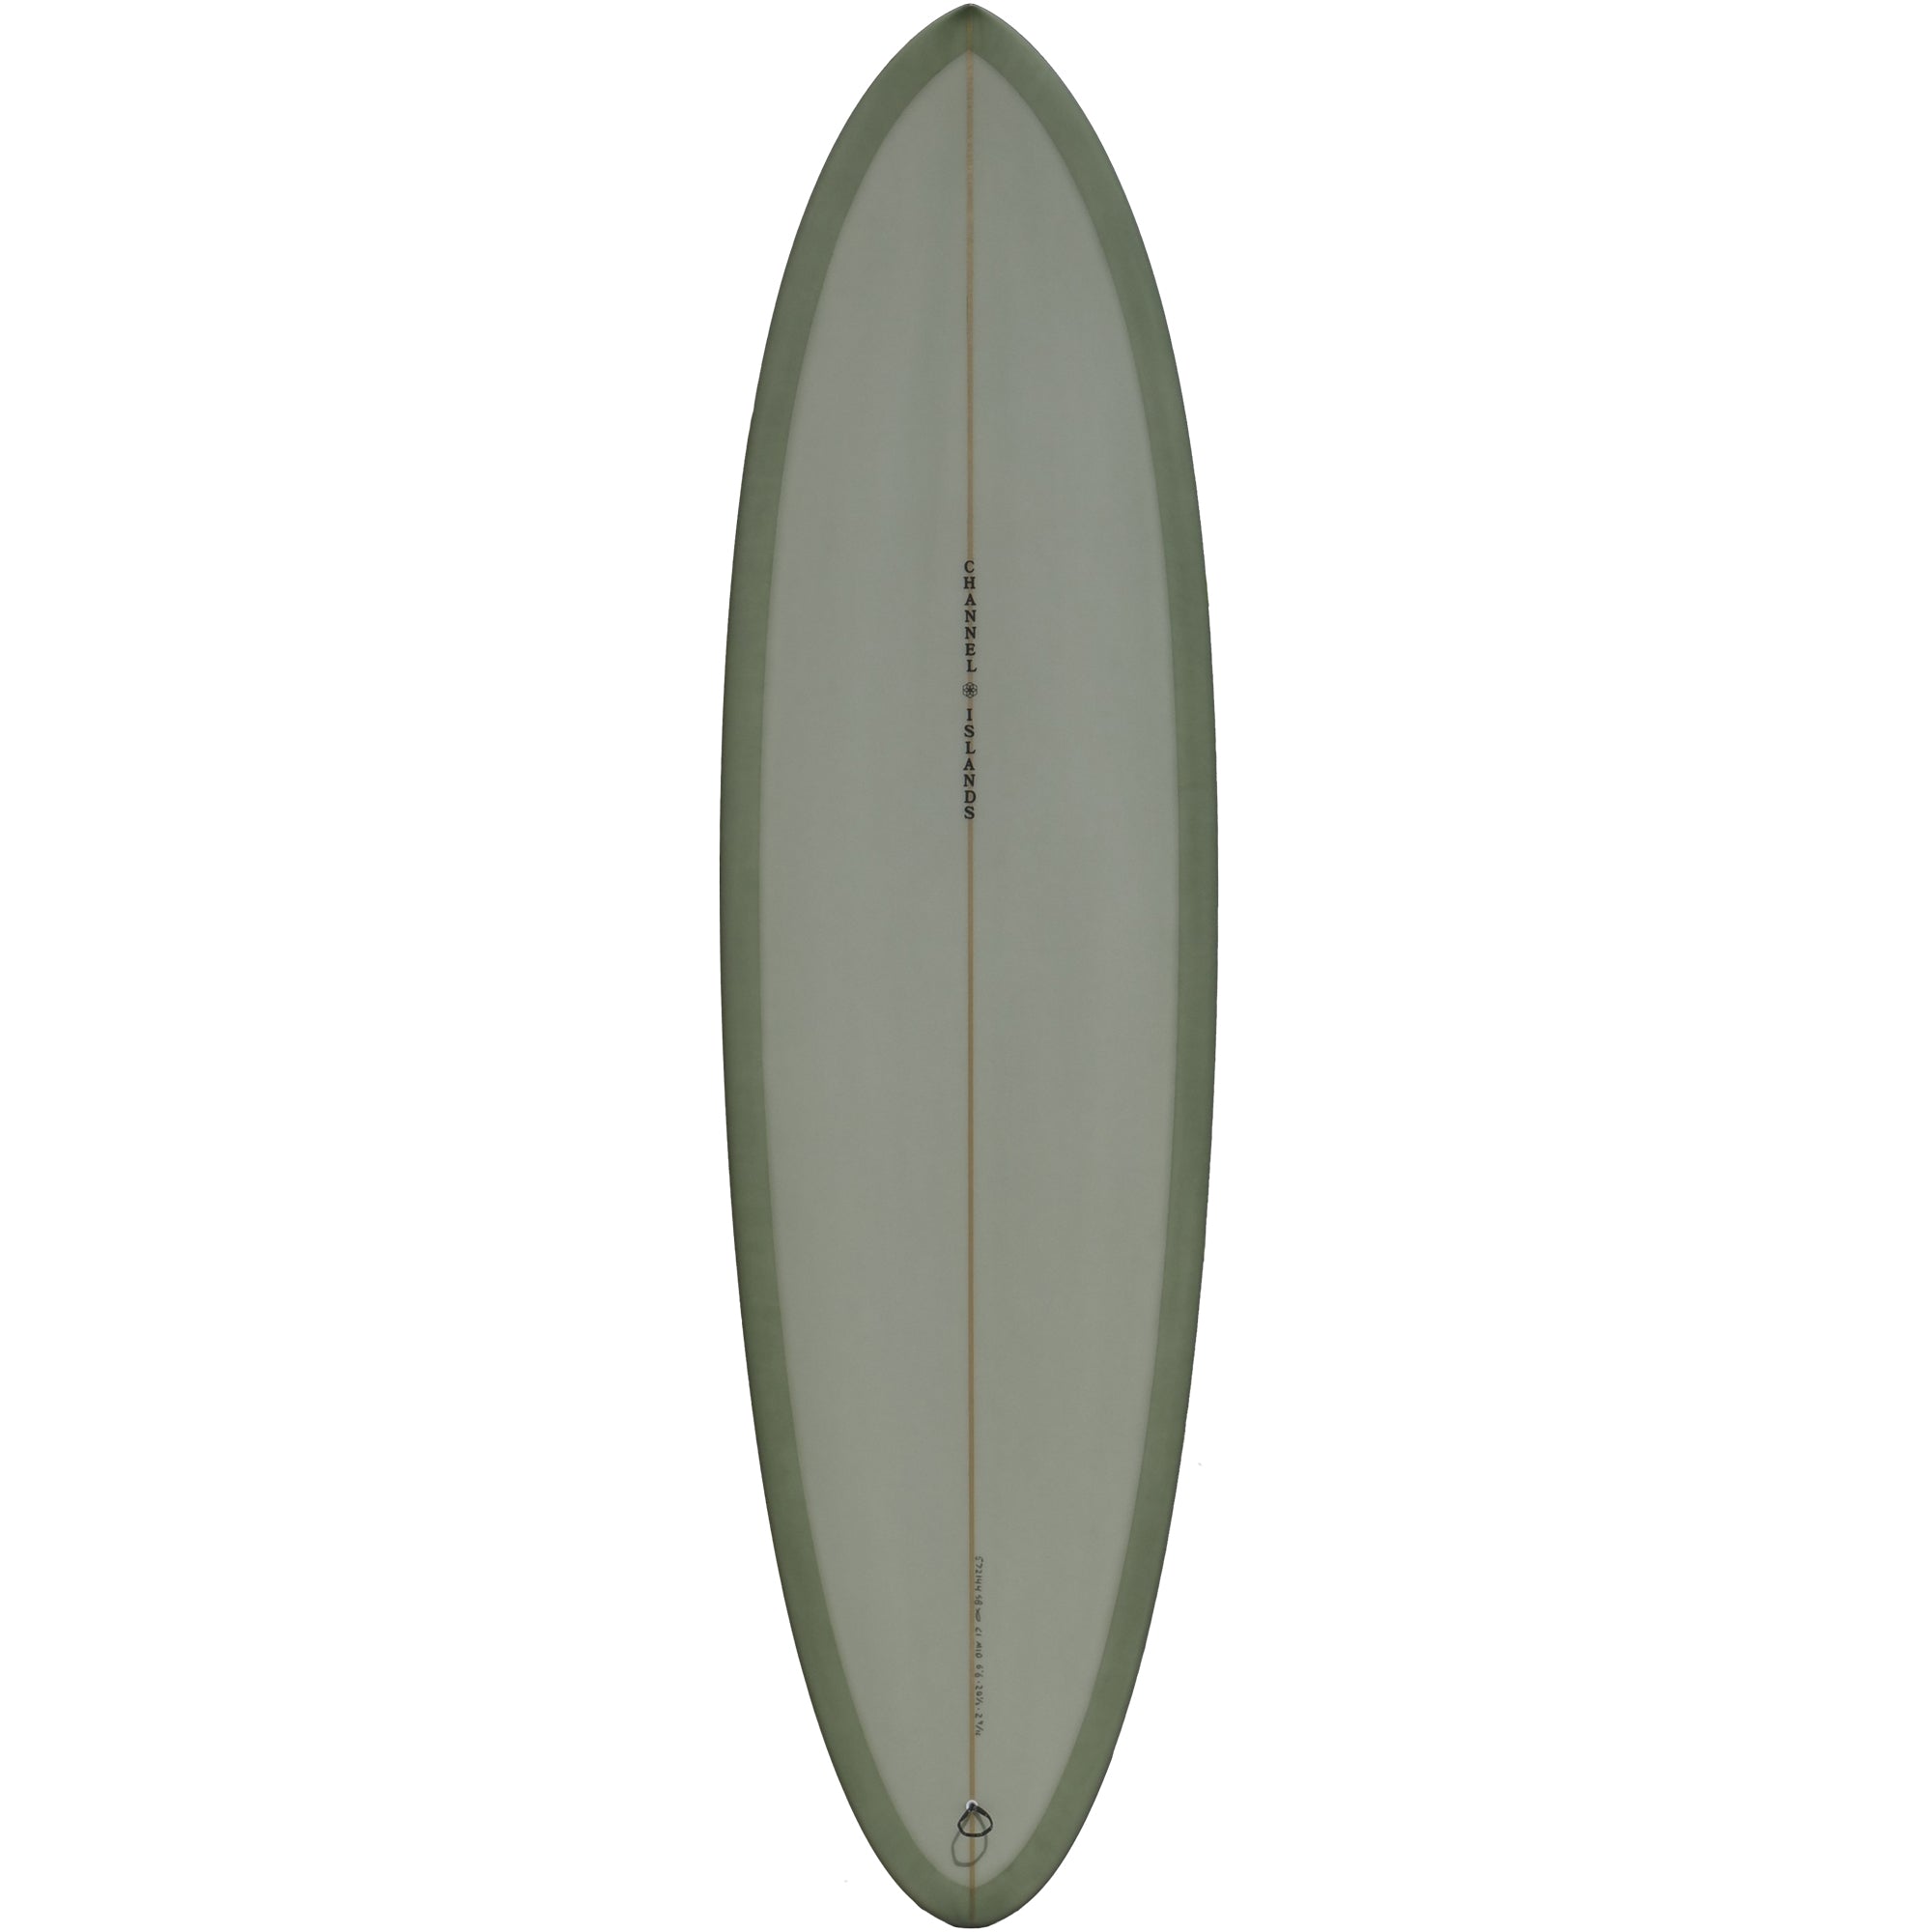 Solid surfboard 7.0 - サーフィン